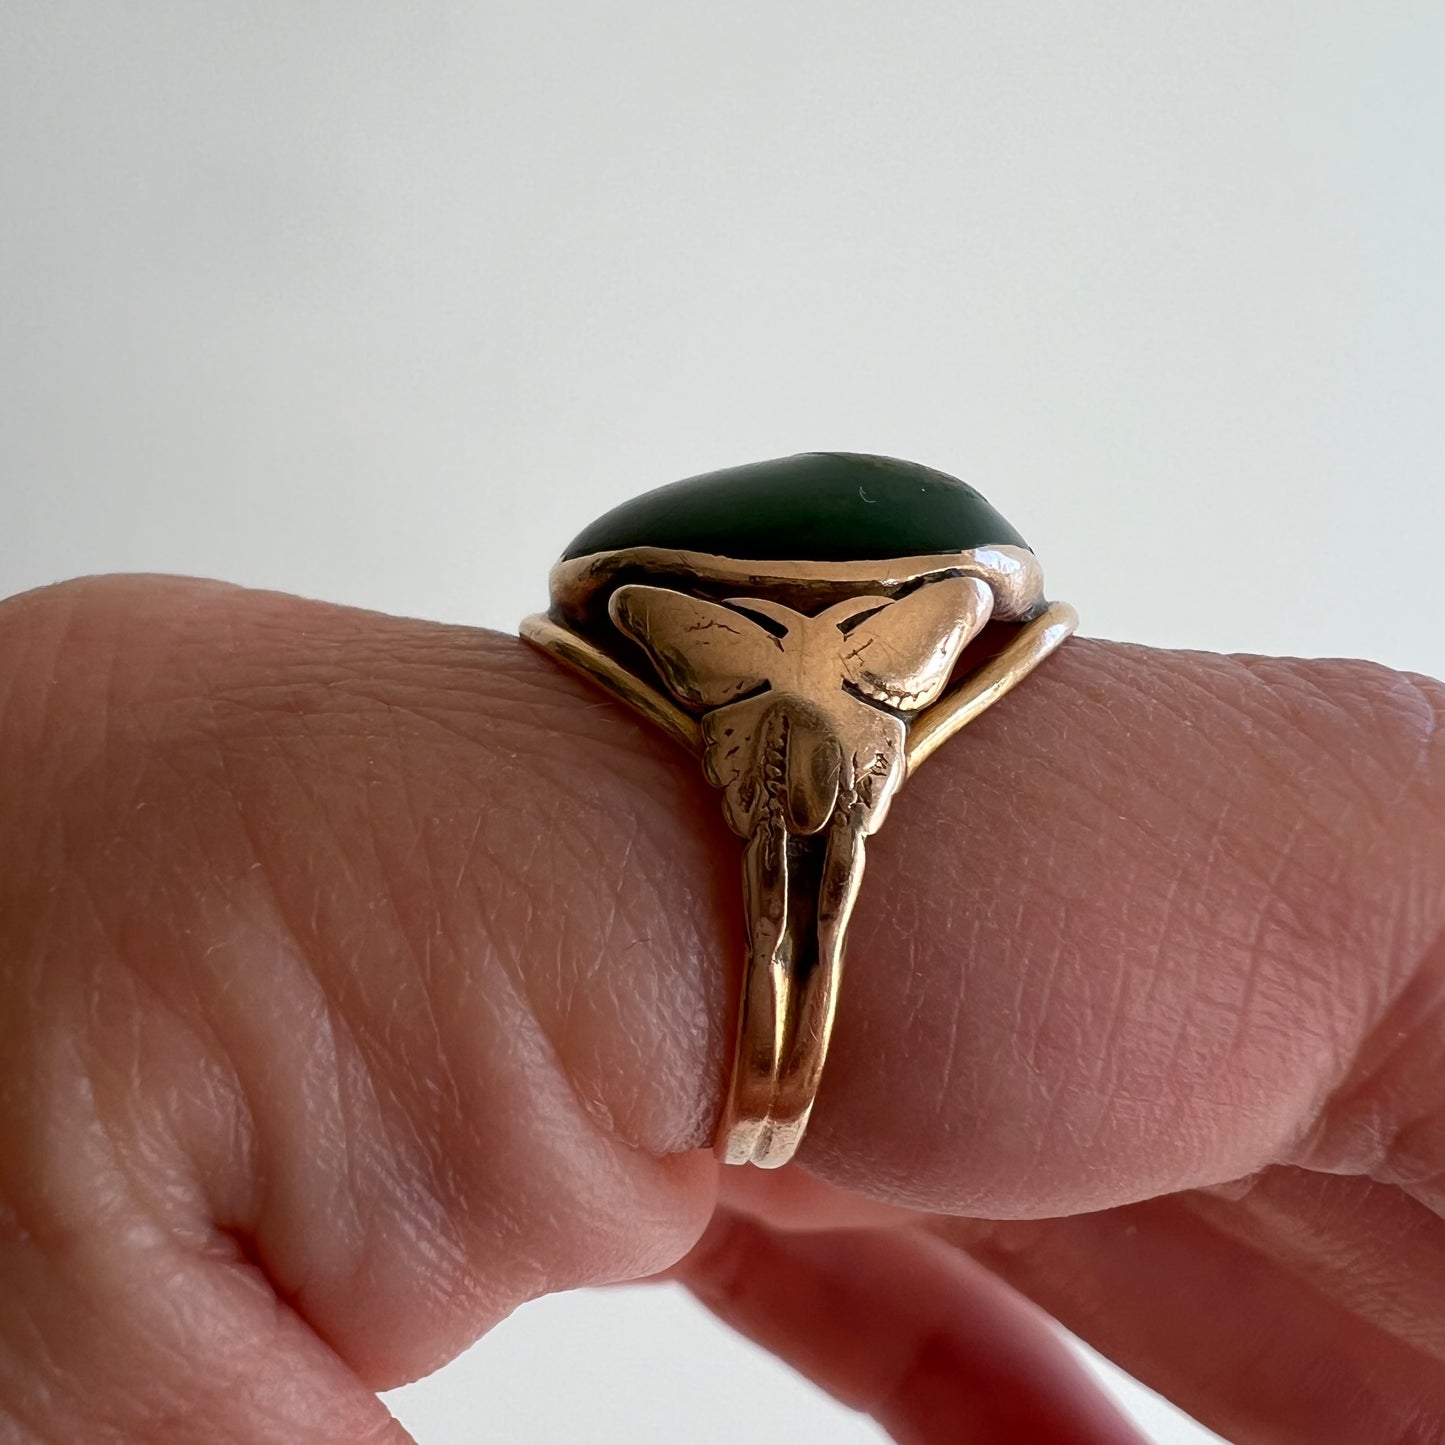 A N T I Q U E // global luna / 14k gold and green turquoise / size 5.5